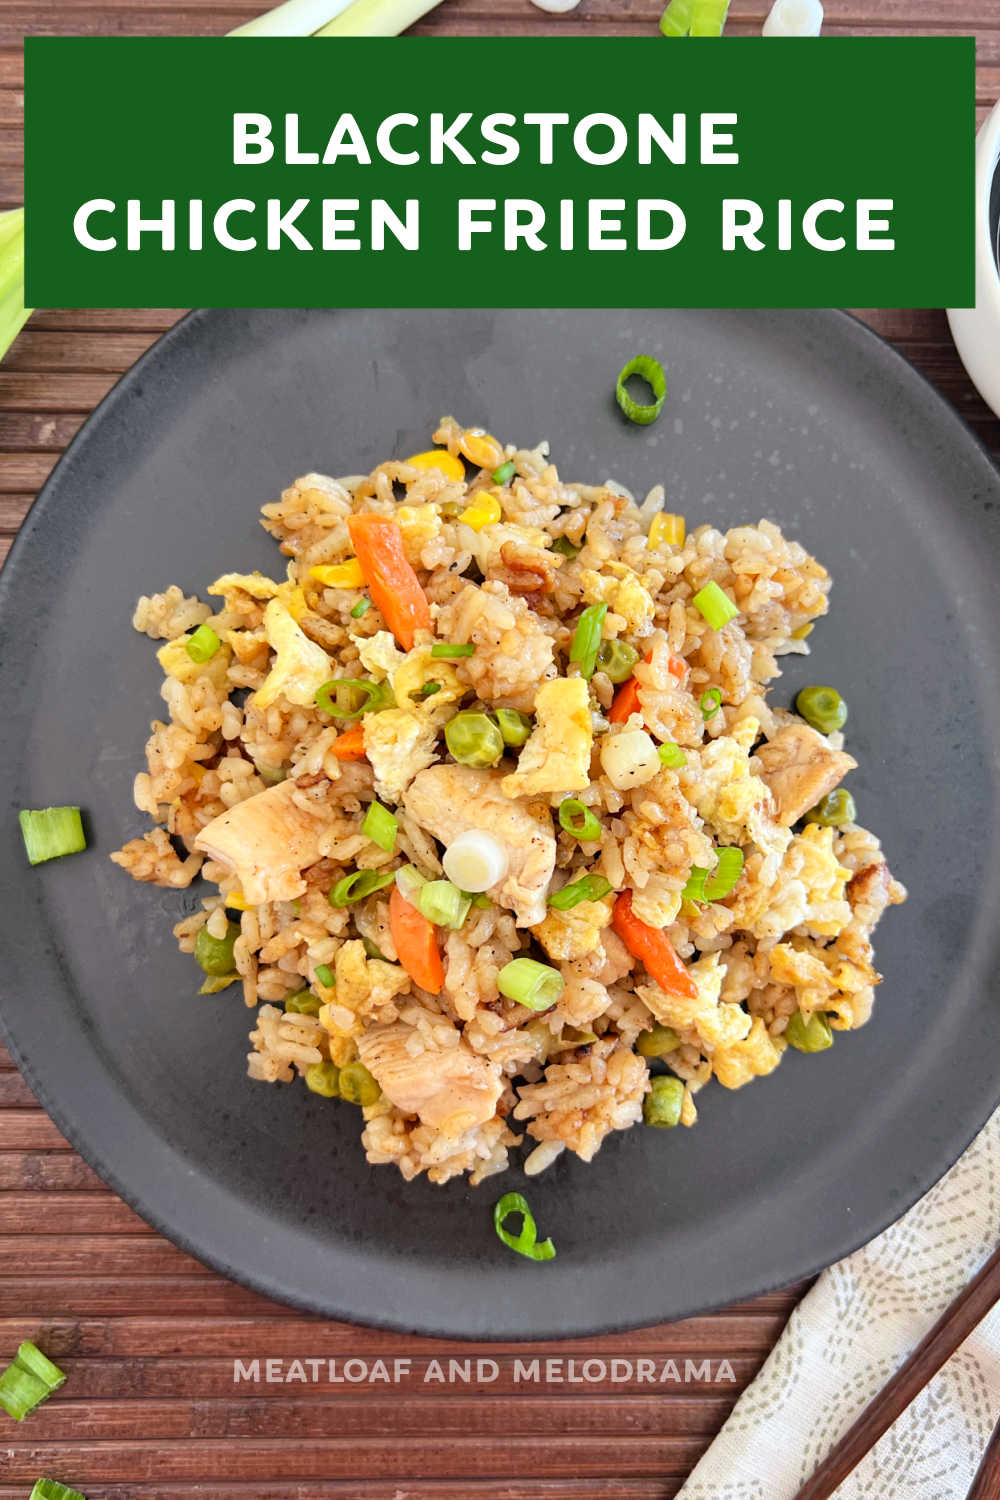 Learn how to cook chicken fried rice on the Blackstone griddle with this easy Blackstone Chicken Fried Rice recipe. A complete meal in minutes the whole family will love! via @meamel